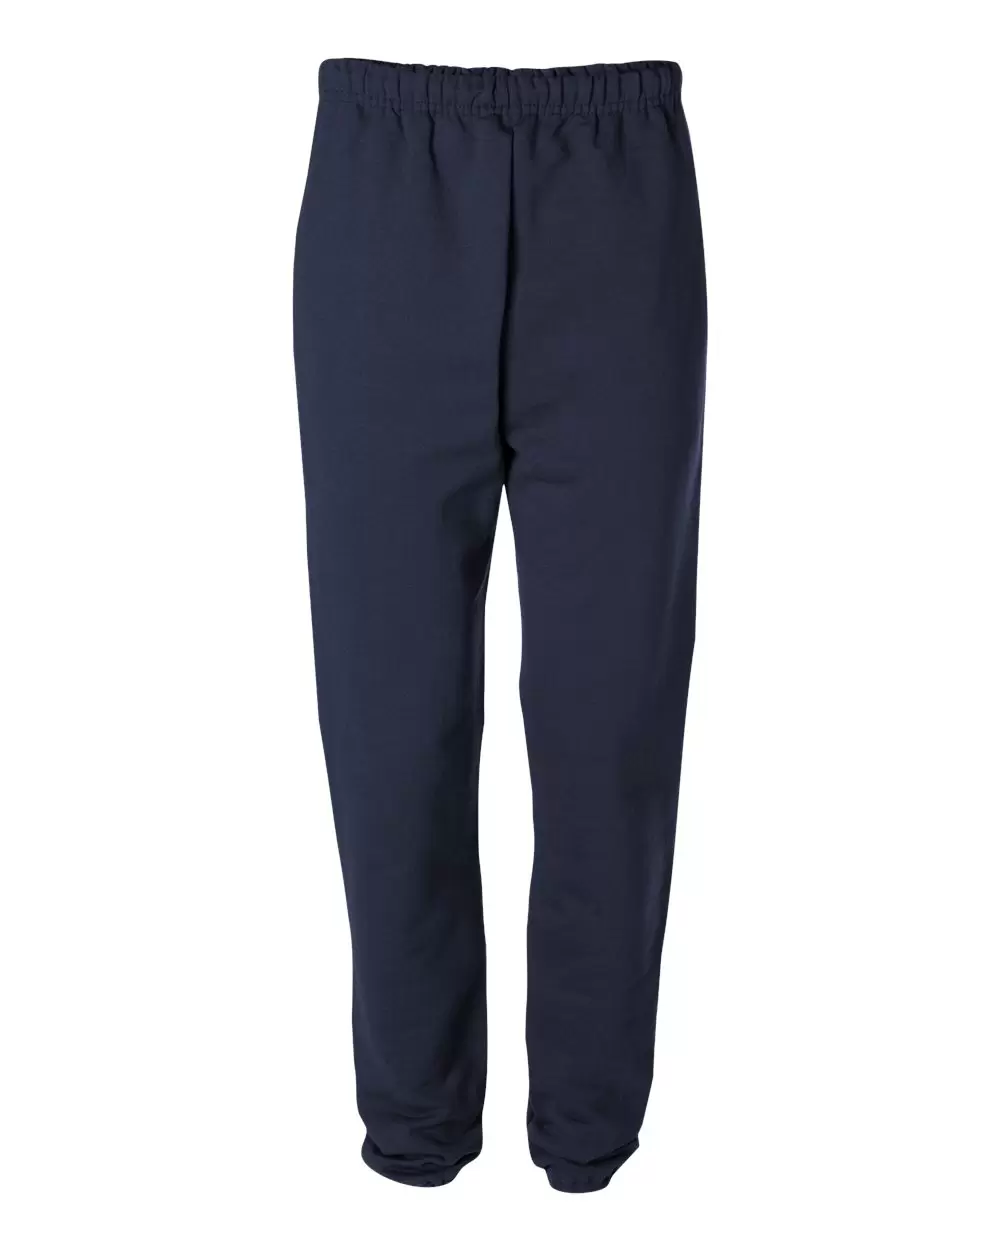 4850 Jerzees Adult Super Sweats® Pants with Pockets - From $14.95